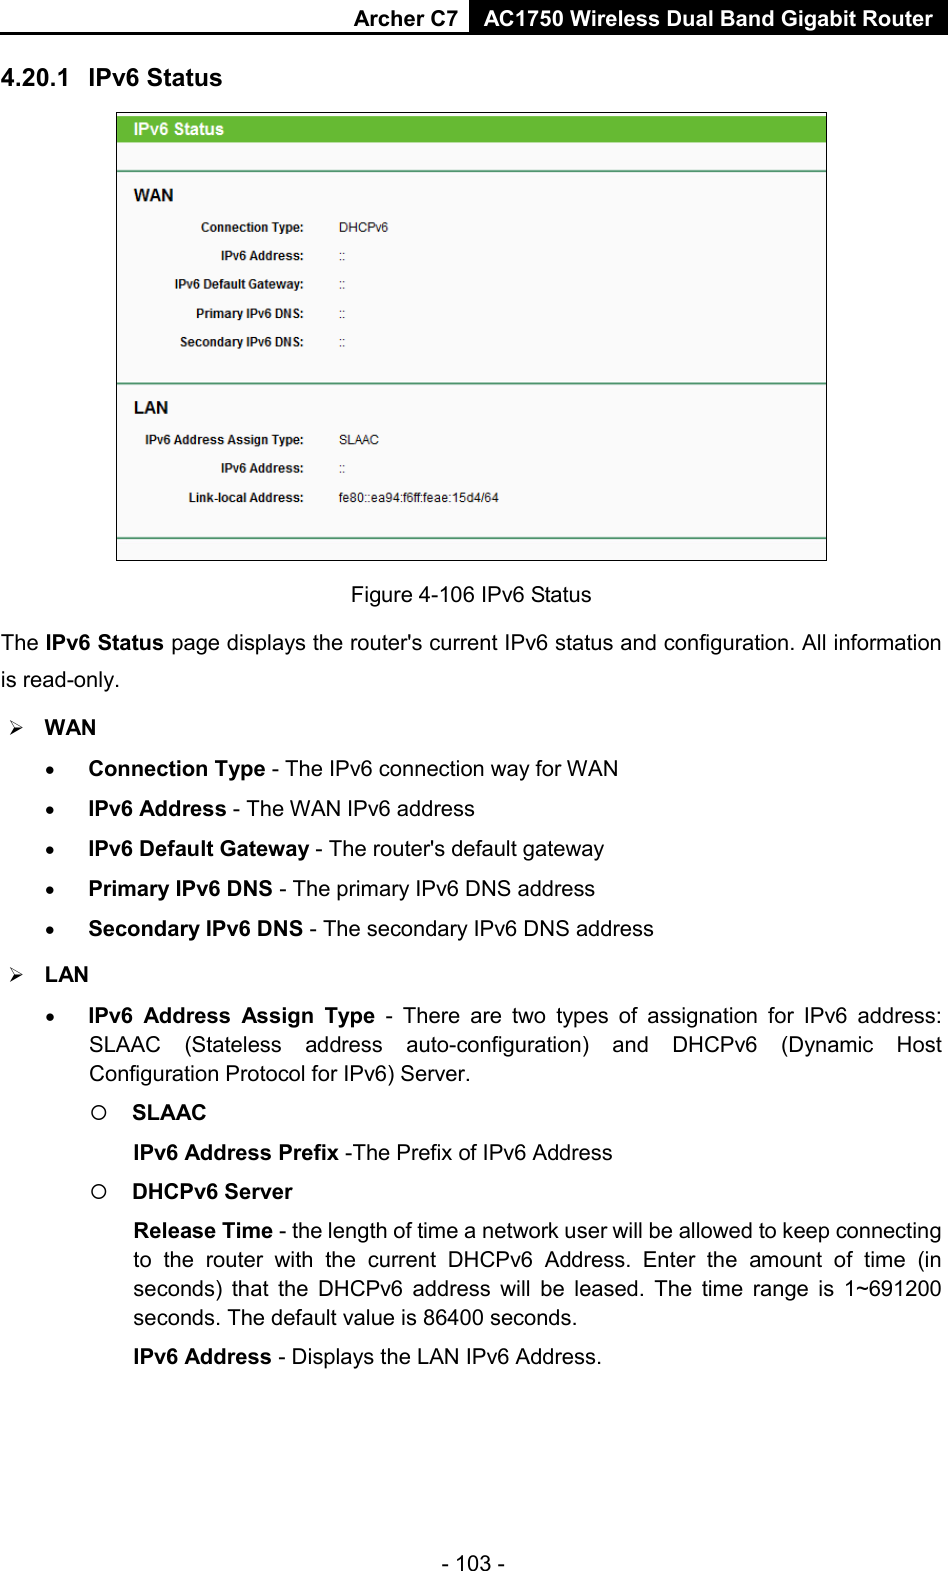 Archer C7 AC1750 Wireless Dual Band Gigabit Router  4.20.1 IPv6 Status  Figure 4-106 IPv6 Status The IPv6 Status page displays the router&apos;s current IPv6 status and configuration. All information is read-only.    WAN   • Connection Type - The IPv6 connection way for WAN • IPv6 Address - The WAN IPv6 address • IPv6 Default Gateway - The router&apos;s default gateway • Primary IPv6 DNS - The primary IPv6 DNS address • Secondary IPv6 DNS - The secondary IPv6 DNS address  LAN • IPv6 Address Assign Type  -  There are two types of assignation for IPv6 address: SLAAC (Stateless address auto-configuration) and DHCPv6 (Dynamic Host Configuration Protocol for IPv6) Server.  SLAAC IPv6 Address Prefix -The Prefix of IPv6 Address  DHCPv6 Server Release Time - the length of time a network user will be allowed to keep connecting to the router with the current DHCPv6 Address. Enter the amount of time (in seconds) that the DHCPv6 address will be leased. The time range is 1~691200 seconds. The default value is 86400 seconds. IPv6 Address - Displays the LAN IPv6 Address. - 103 - 